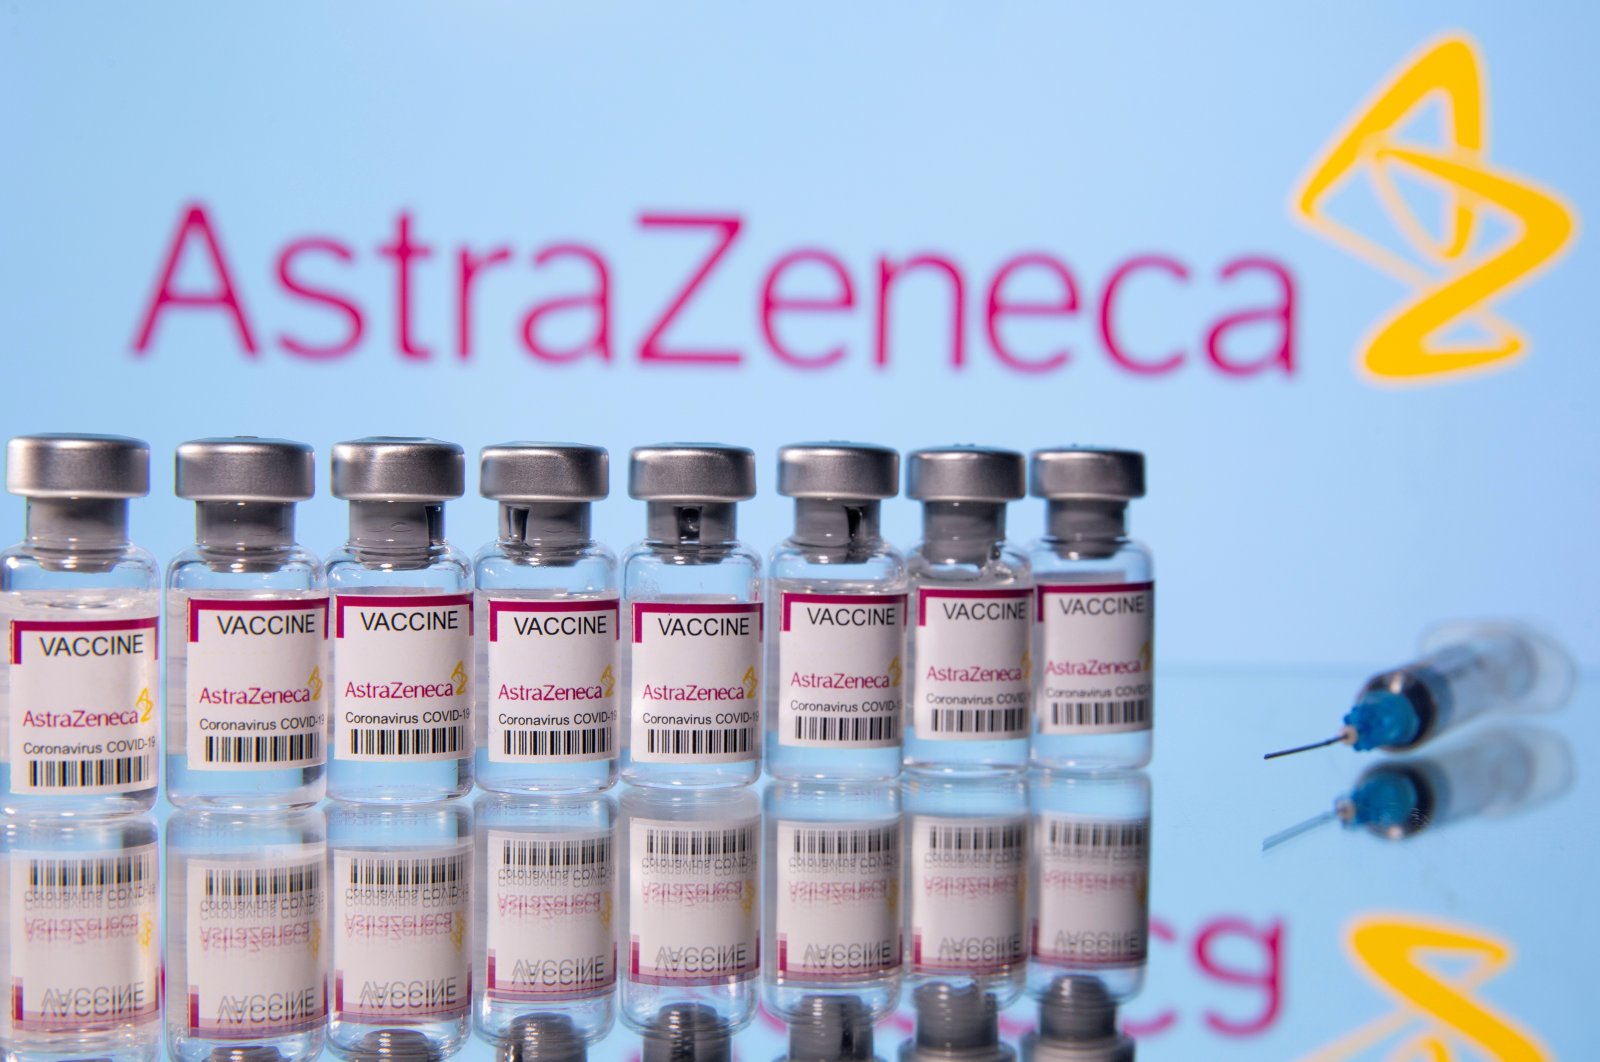 Vials labelled "Astra Zeneca COVID-19 Coronavirus Vaccine" and a syringe are seen in front of a displayed AstraZeneca logo, March 14, 2021. (Reuters Photo)